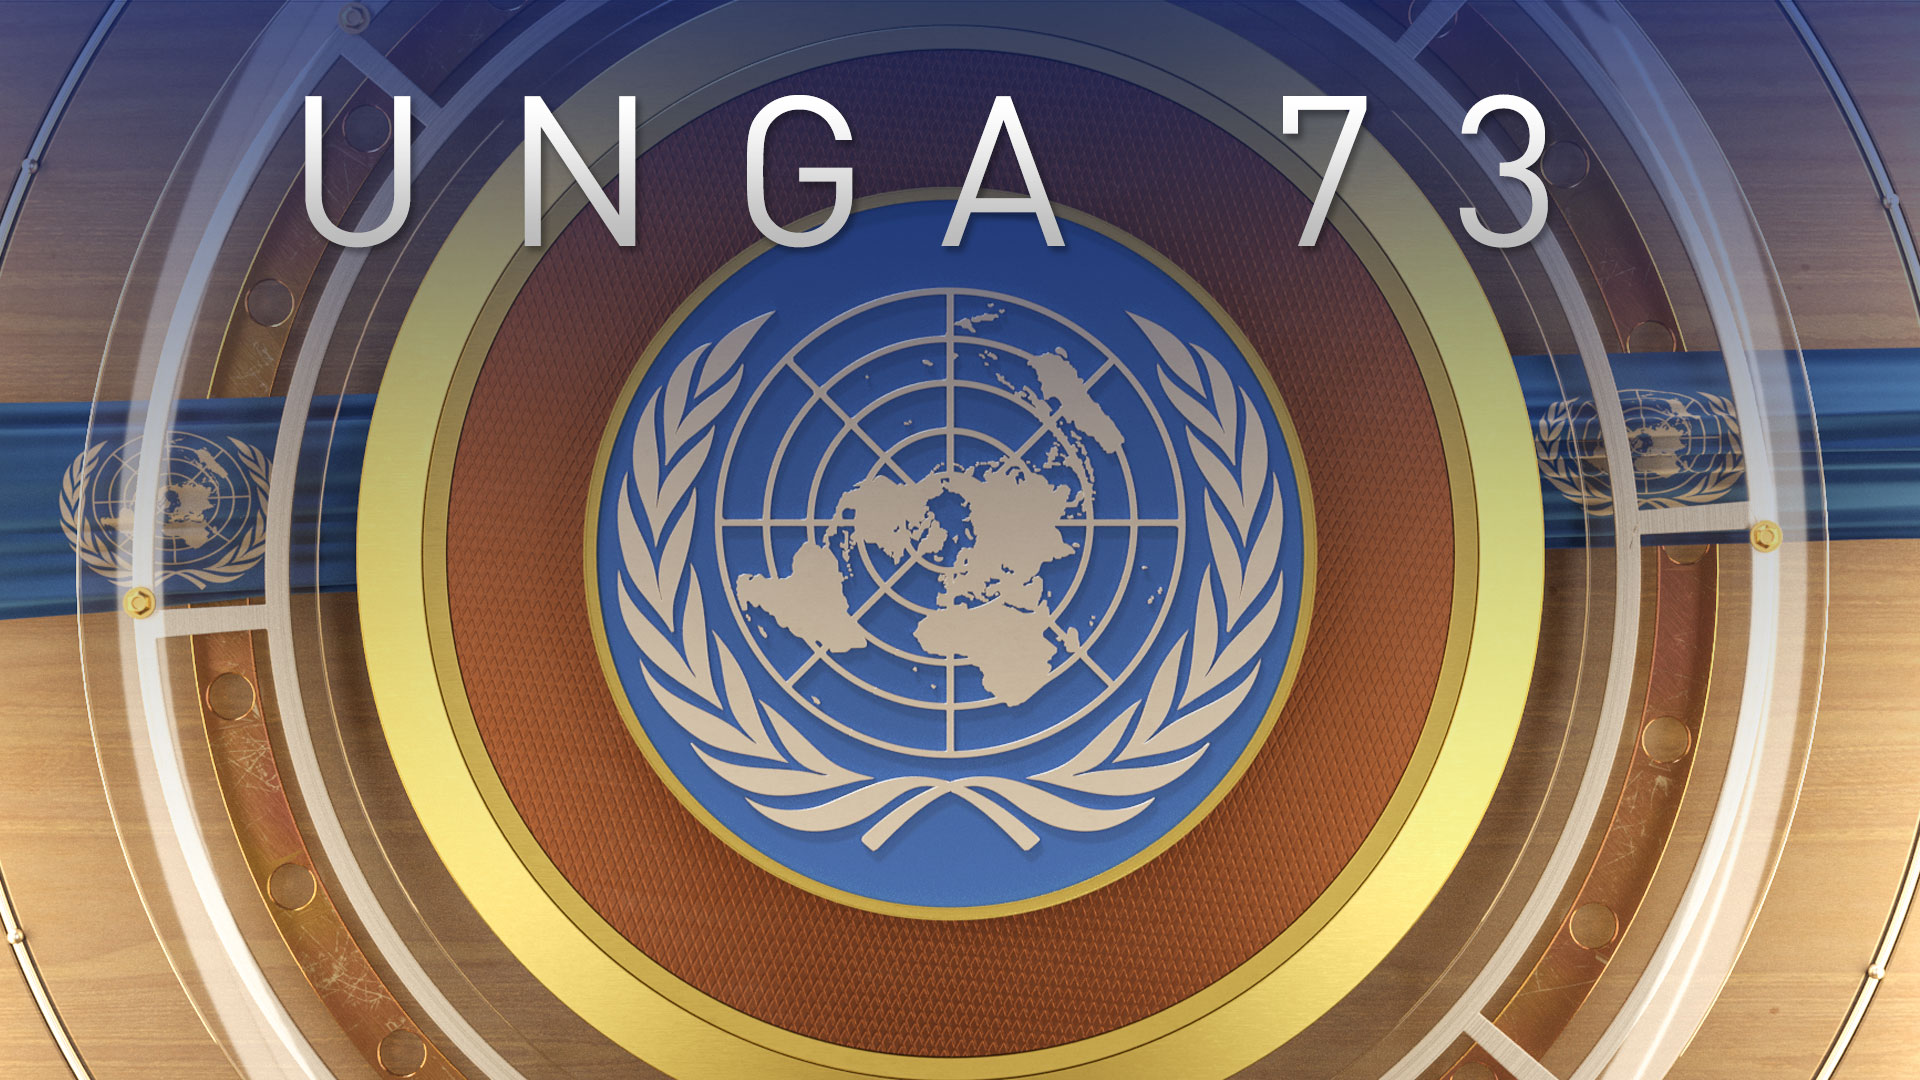 The United Nations General Assembly 73